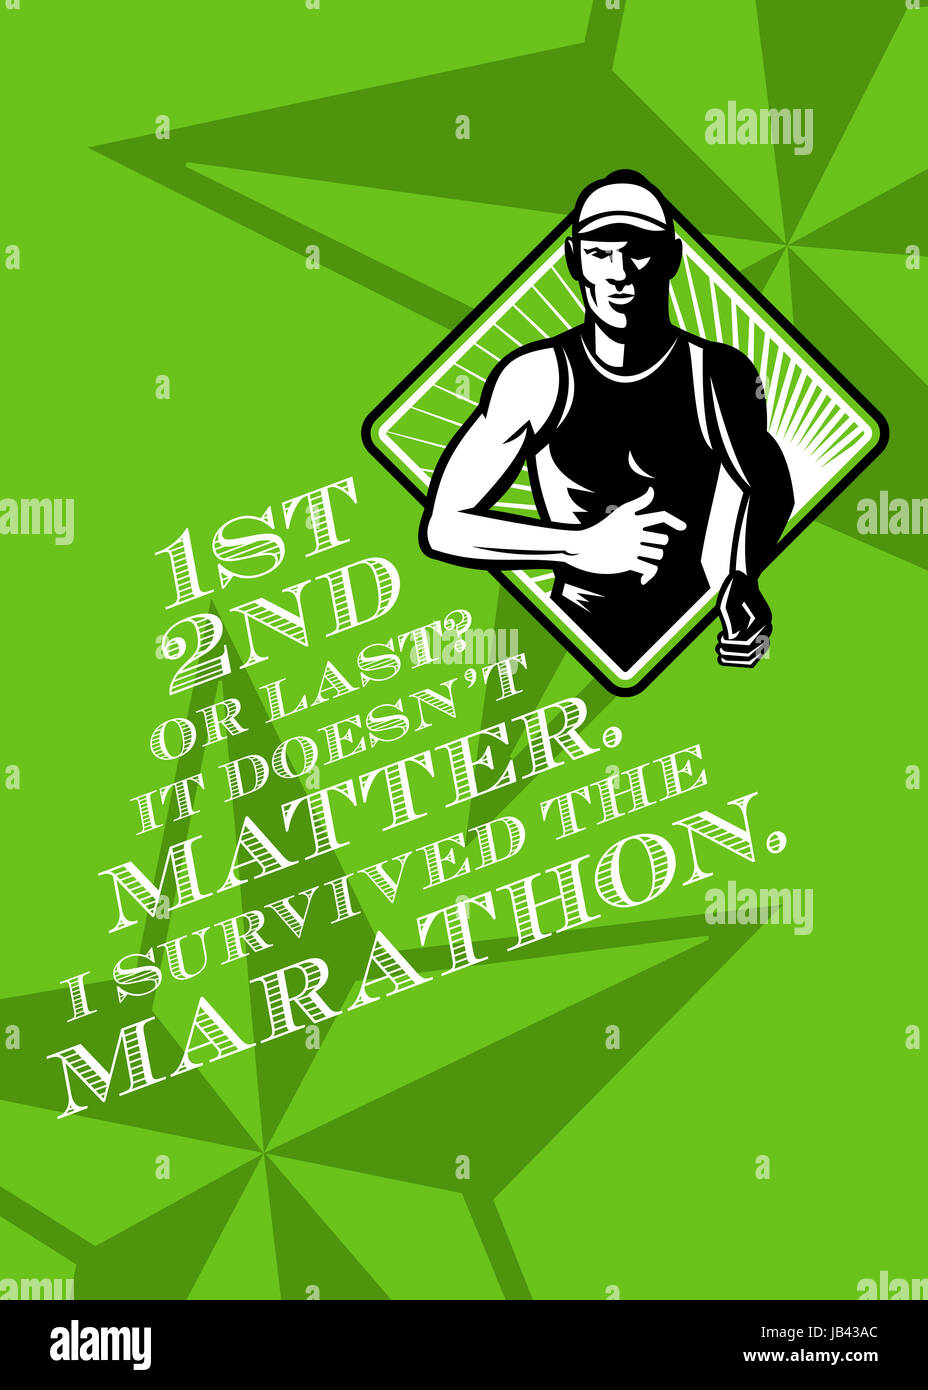 Poster greeting card illustration showing a male athlete marathon runner running facing front set inside diamond shape done in retro style with words First, Second or Last? It doesn't matter. I survived the Marathon. Stock Photo